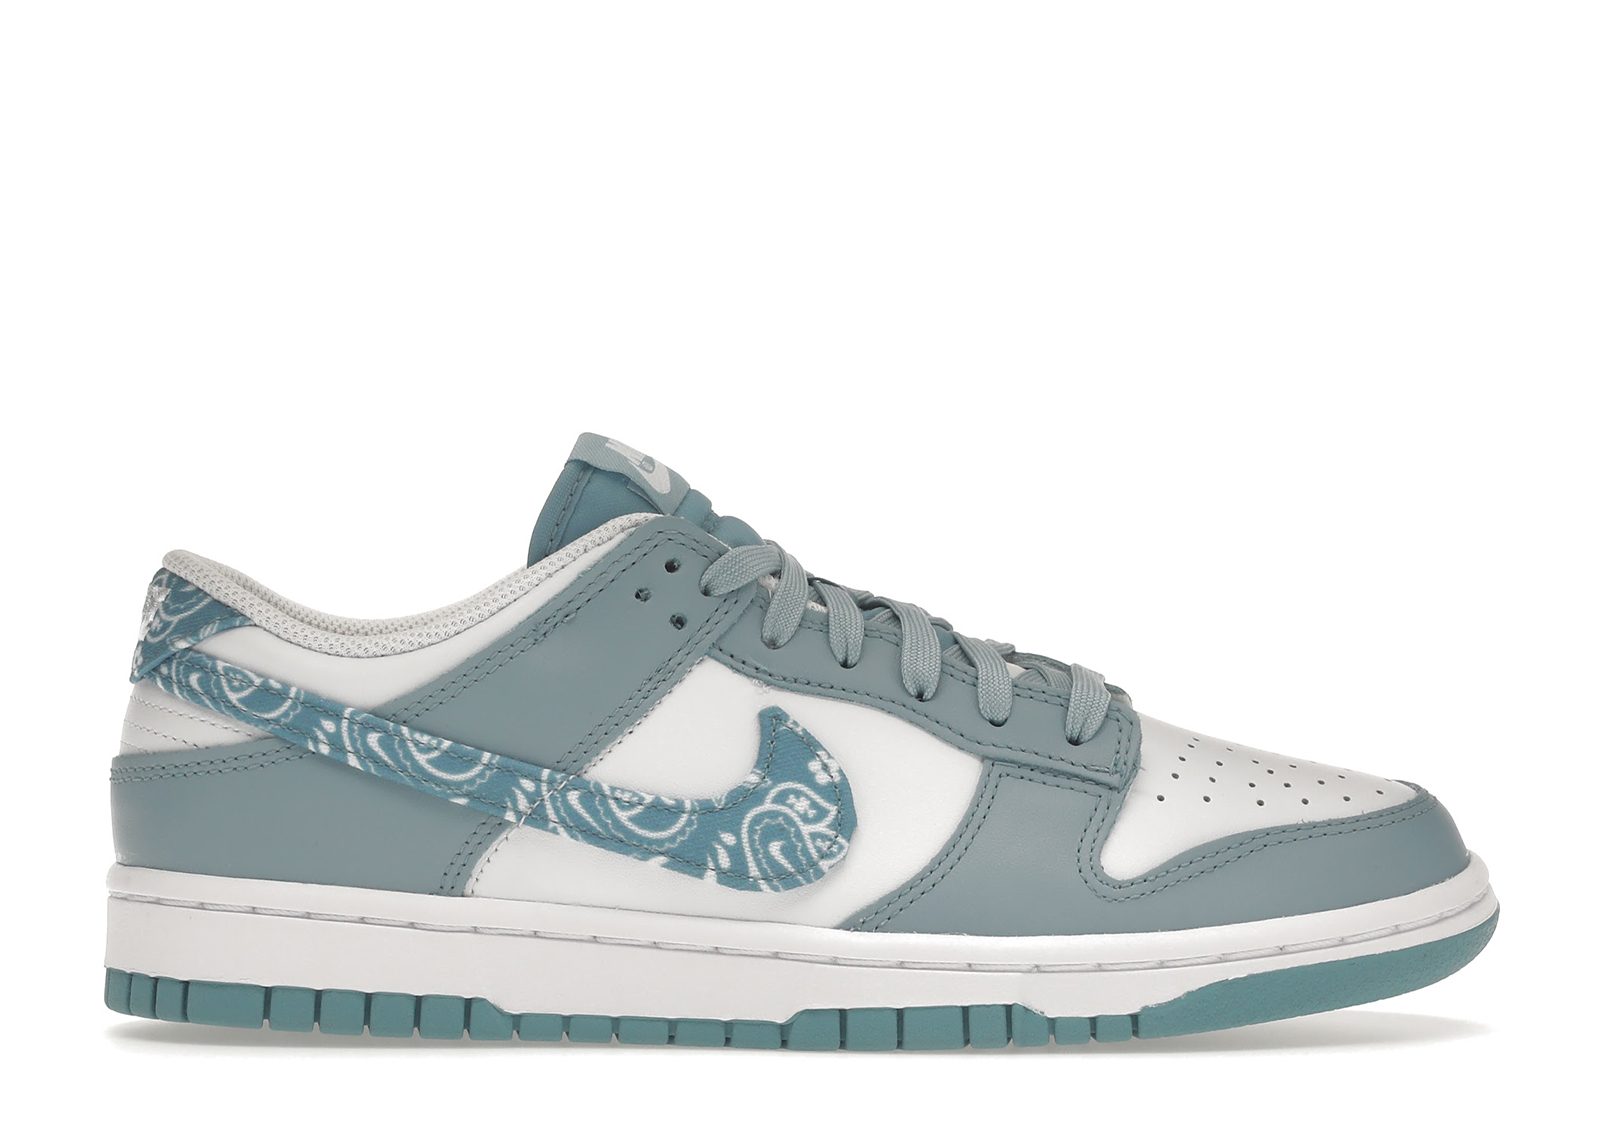 Nike Dunk Low Essential Paisley Pack Worn Blue (W) - DH4401-101 - US